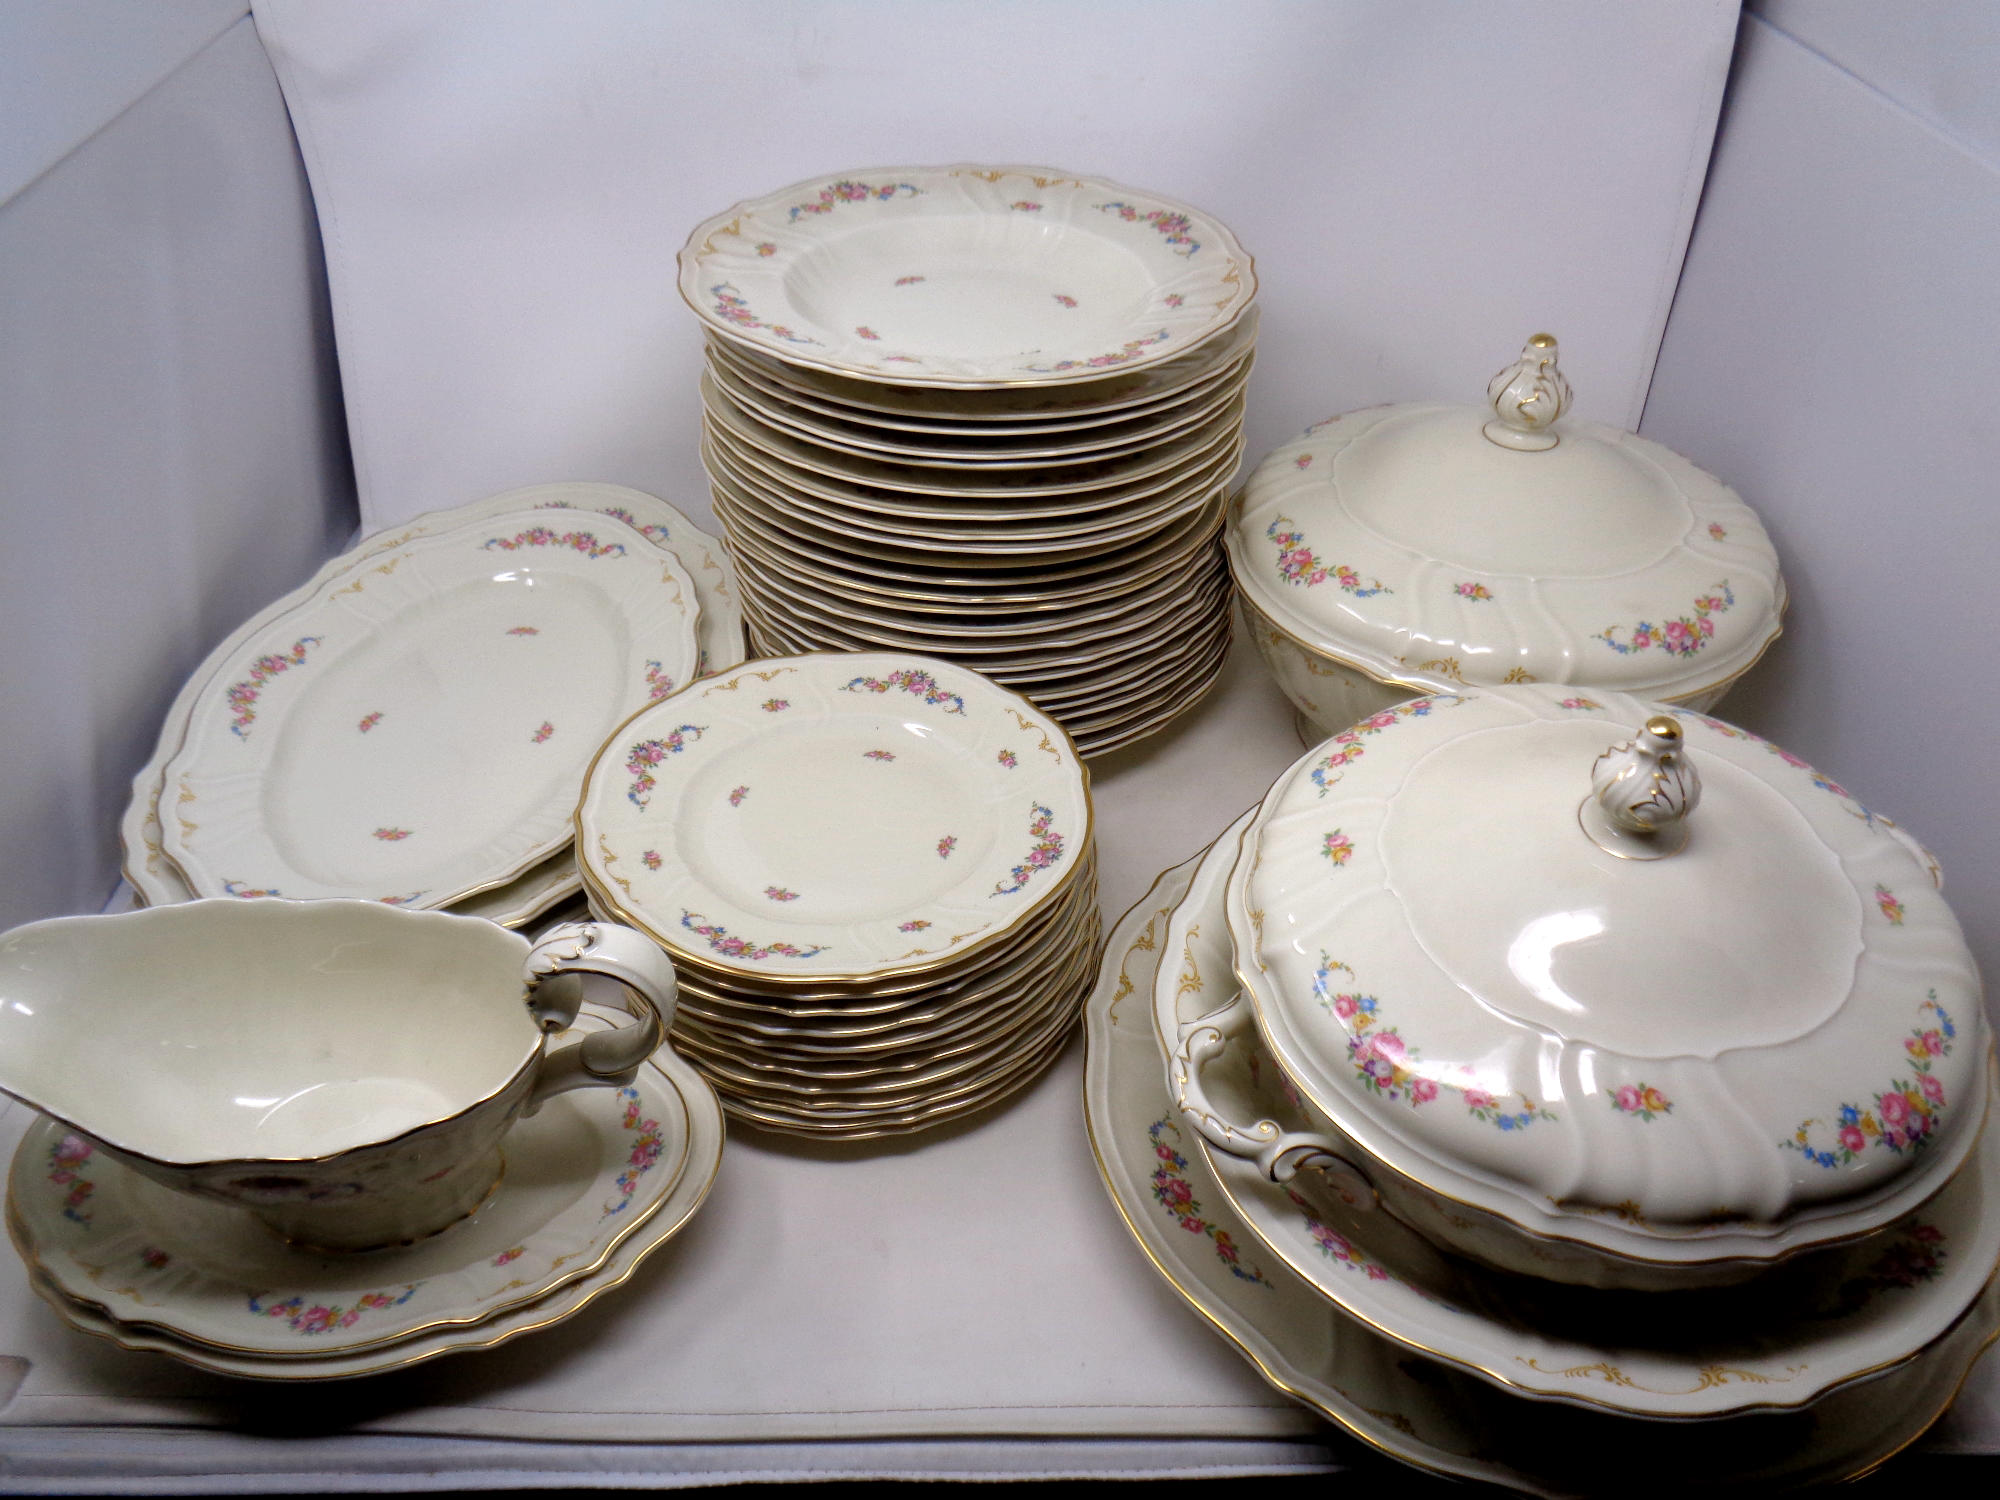 A forty-five piece German Rosenthal Parzival dinner service